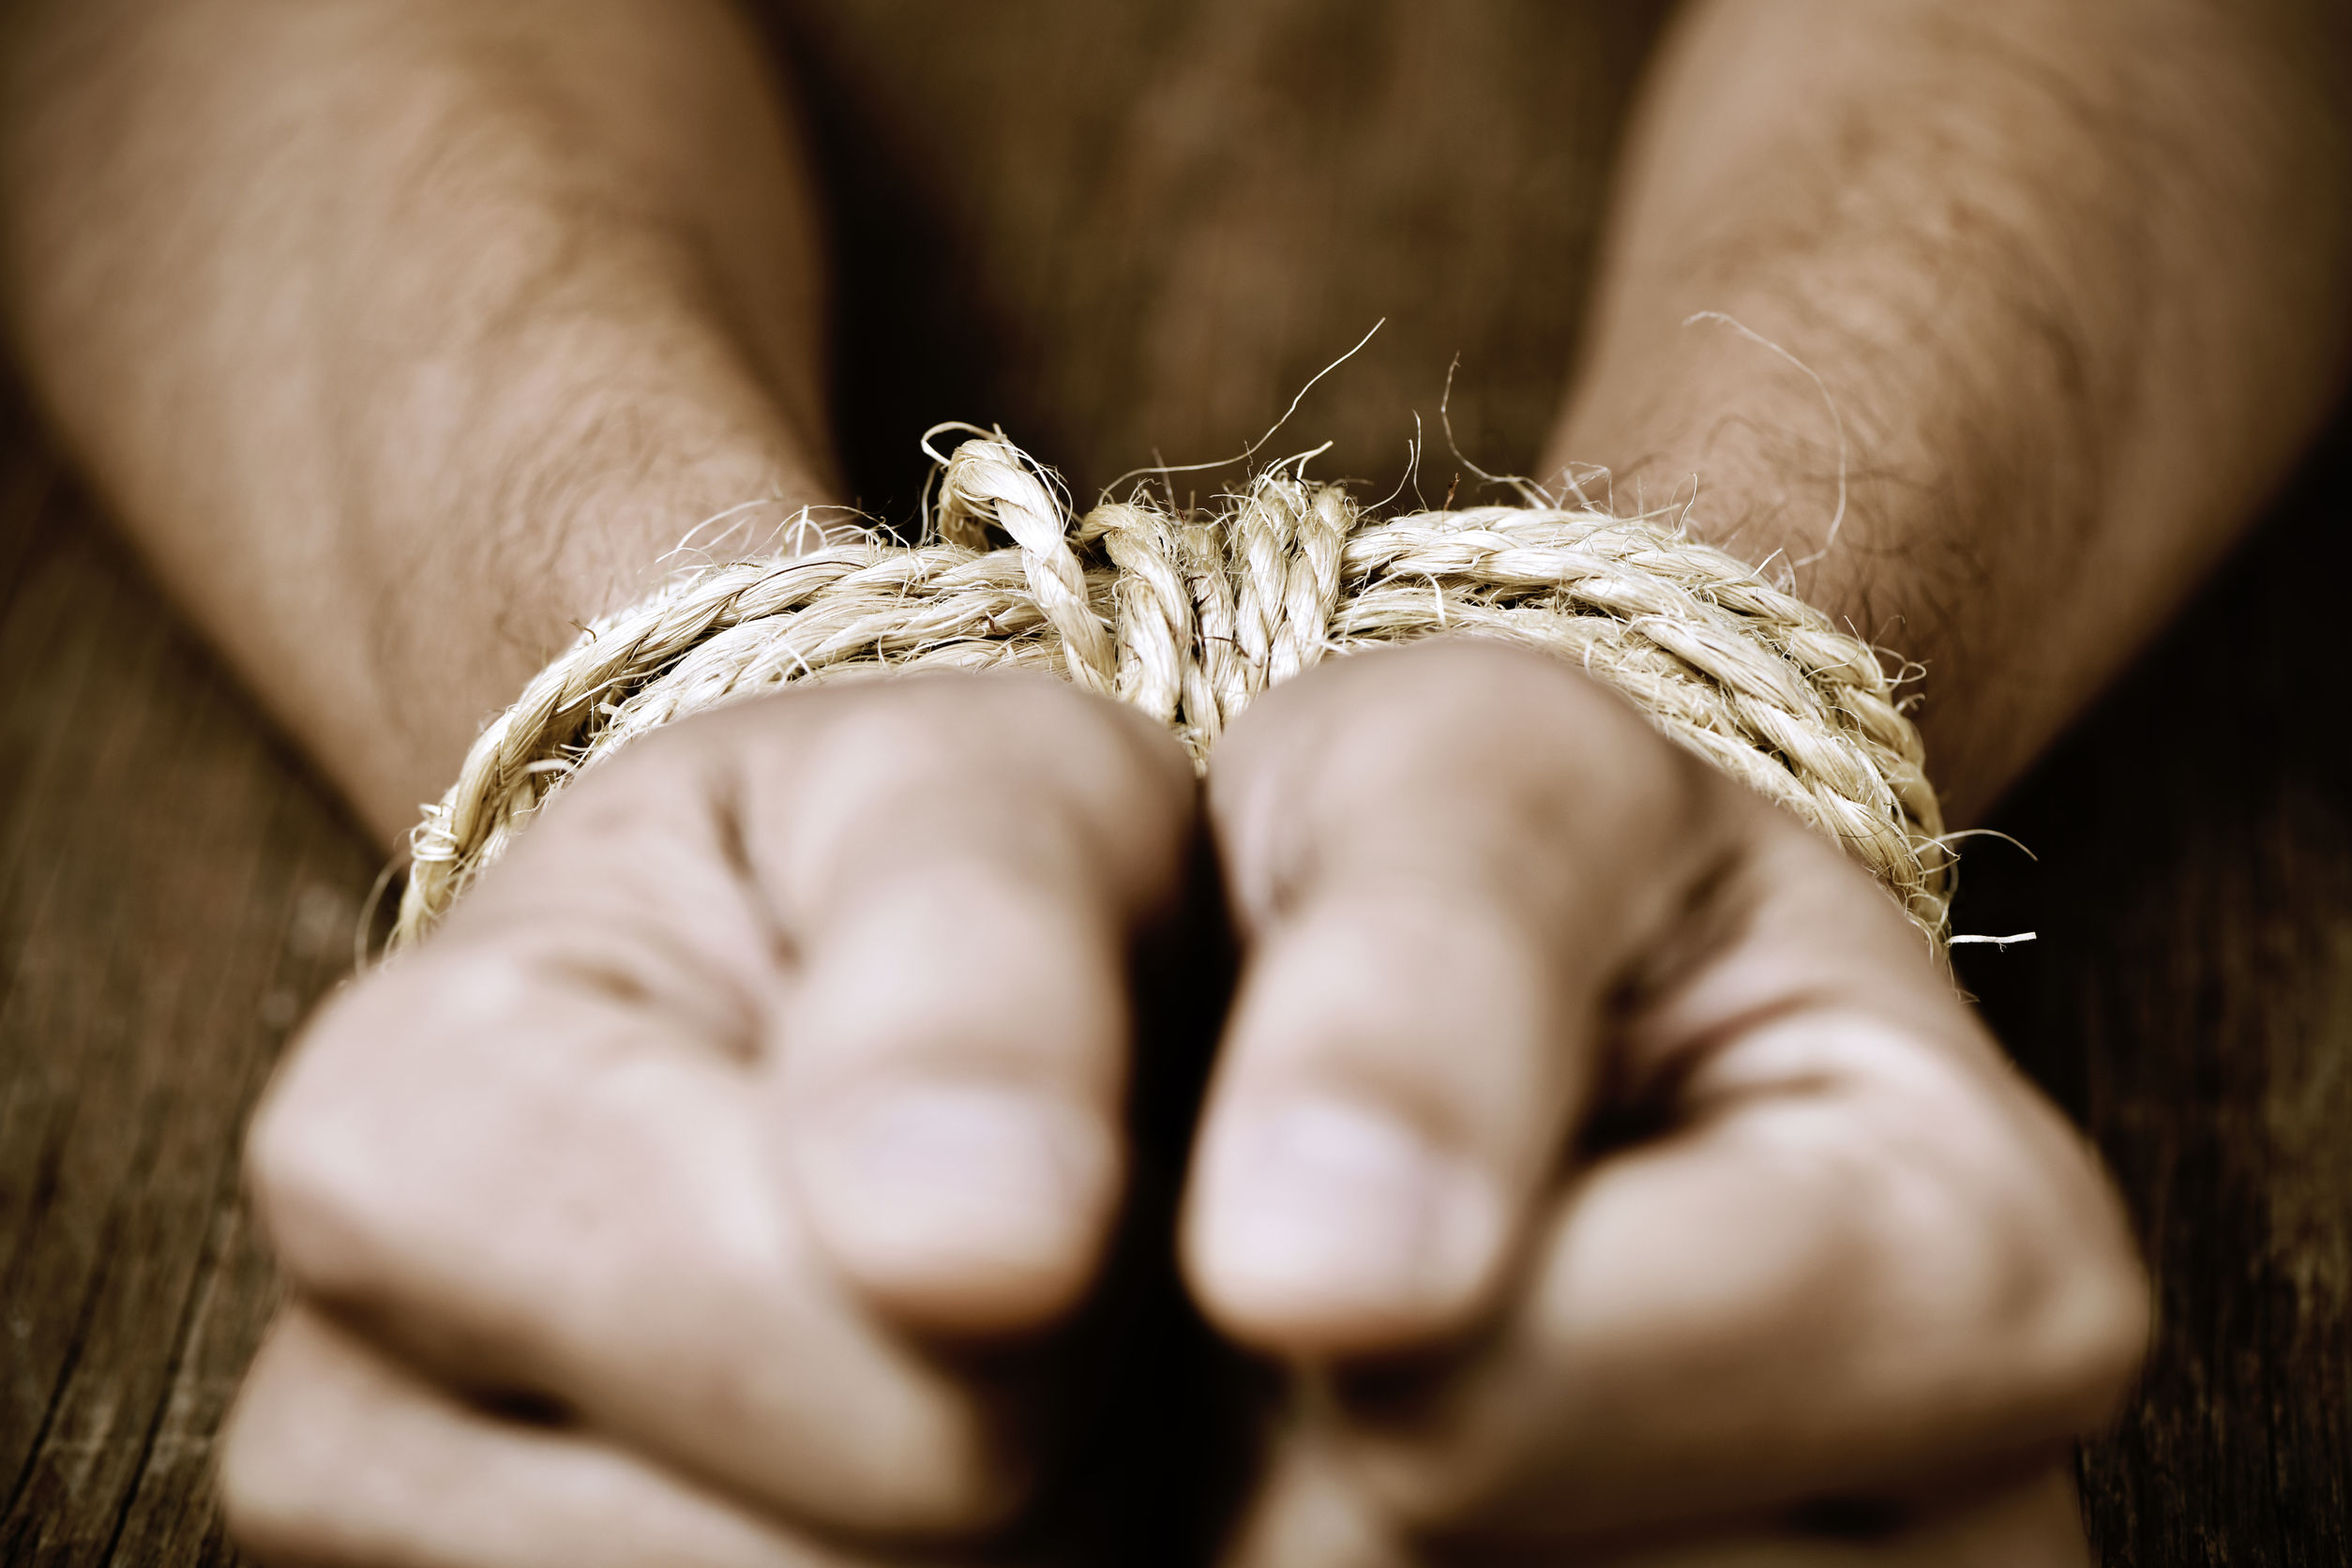 49901113 - closeup of the hands of a young man tied with rope, as a symbol of oppression or repression, with a dramatic effect